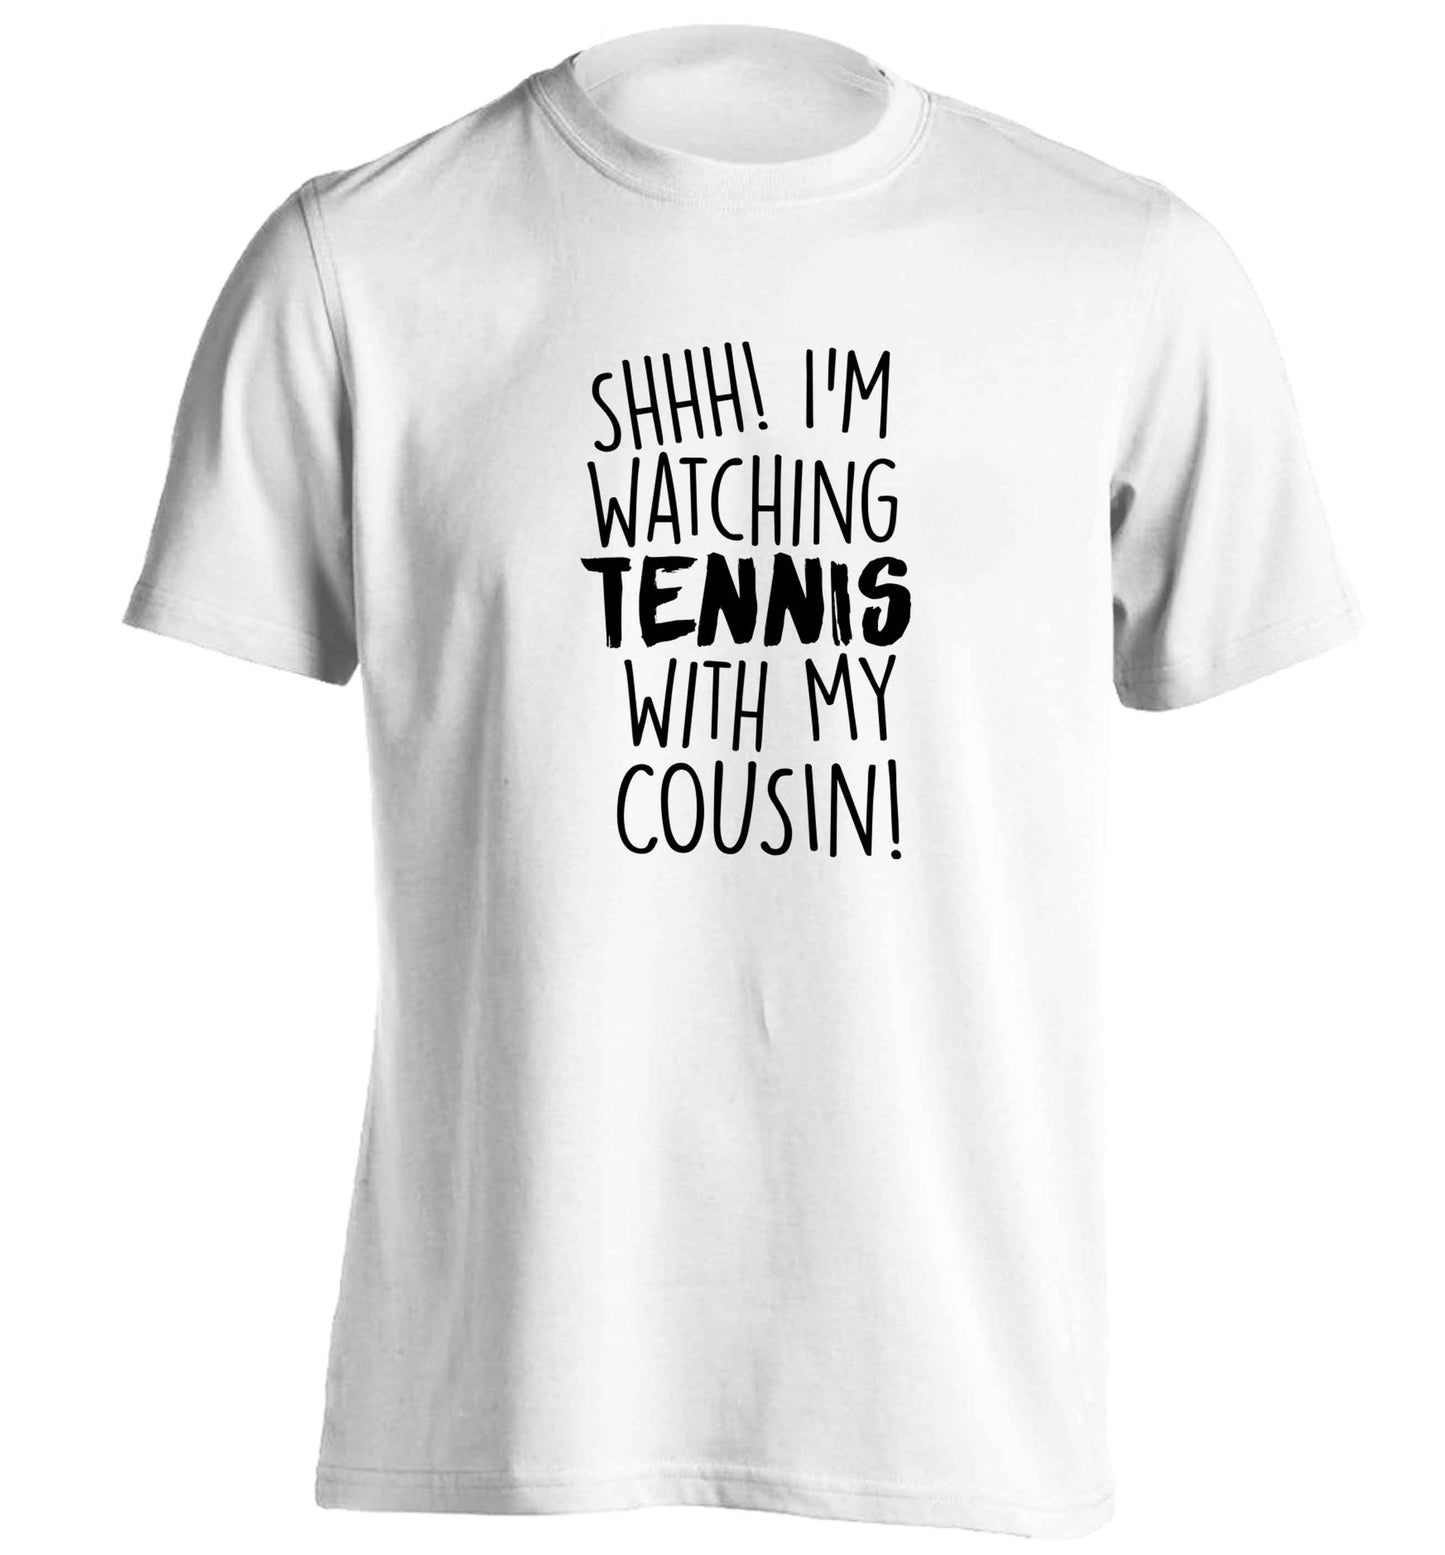 Shh! I'm watching tennis with my cousin! adults unisex white Tshirt 2XL